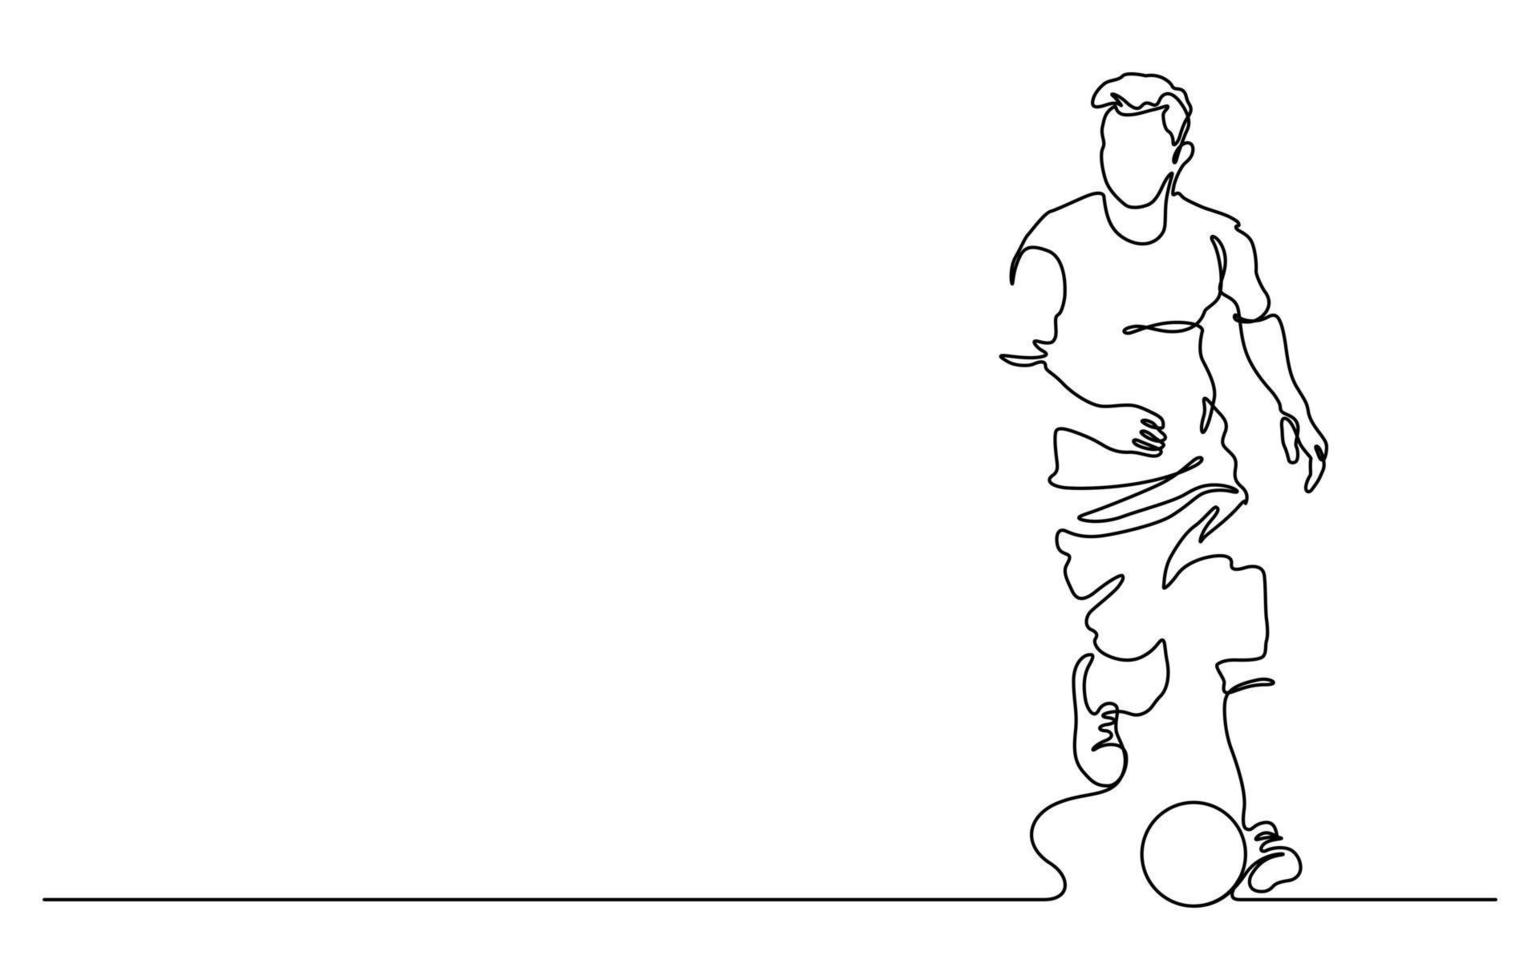 continuous line drawing of man playing soccer vector illustration